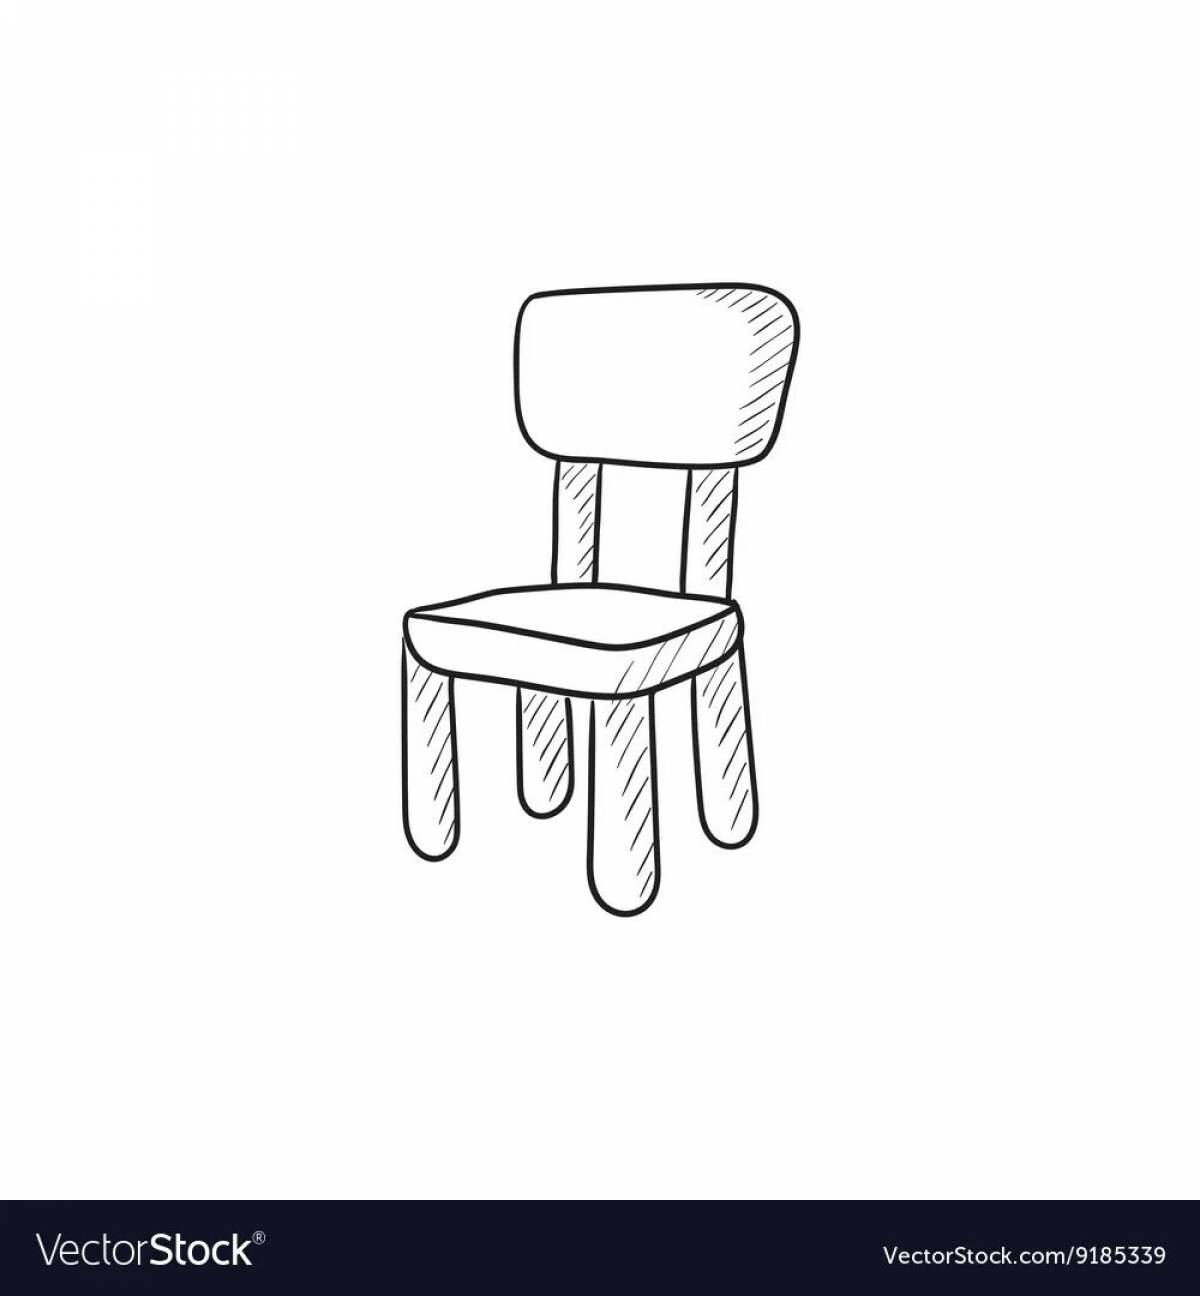 Coloring page cute stool